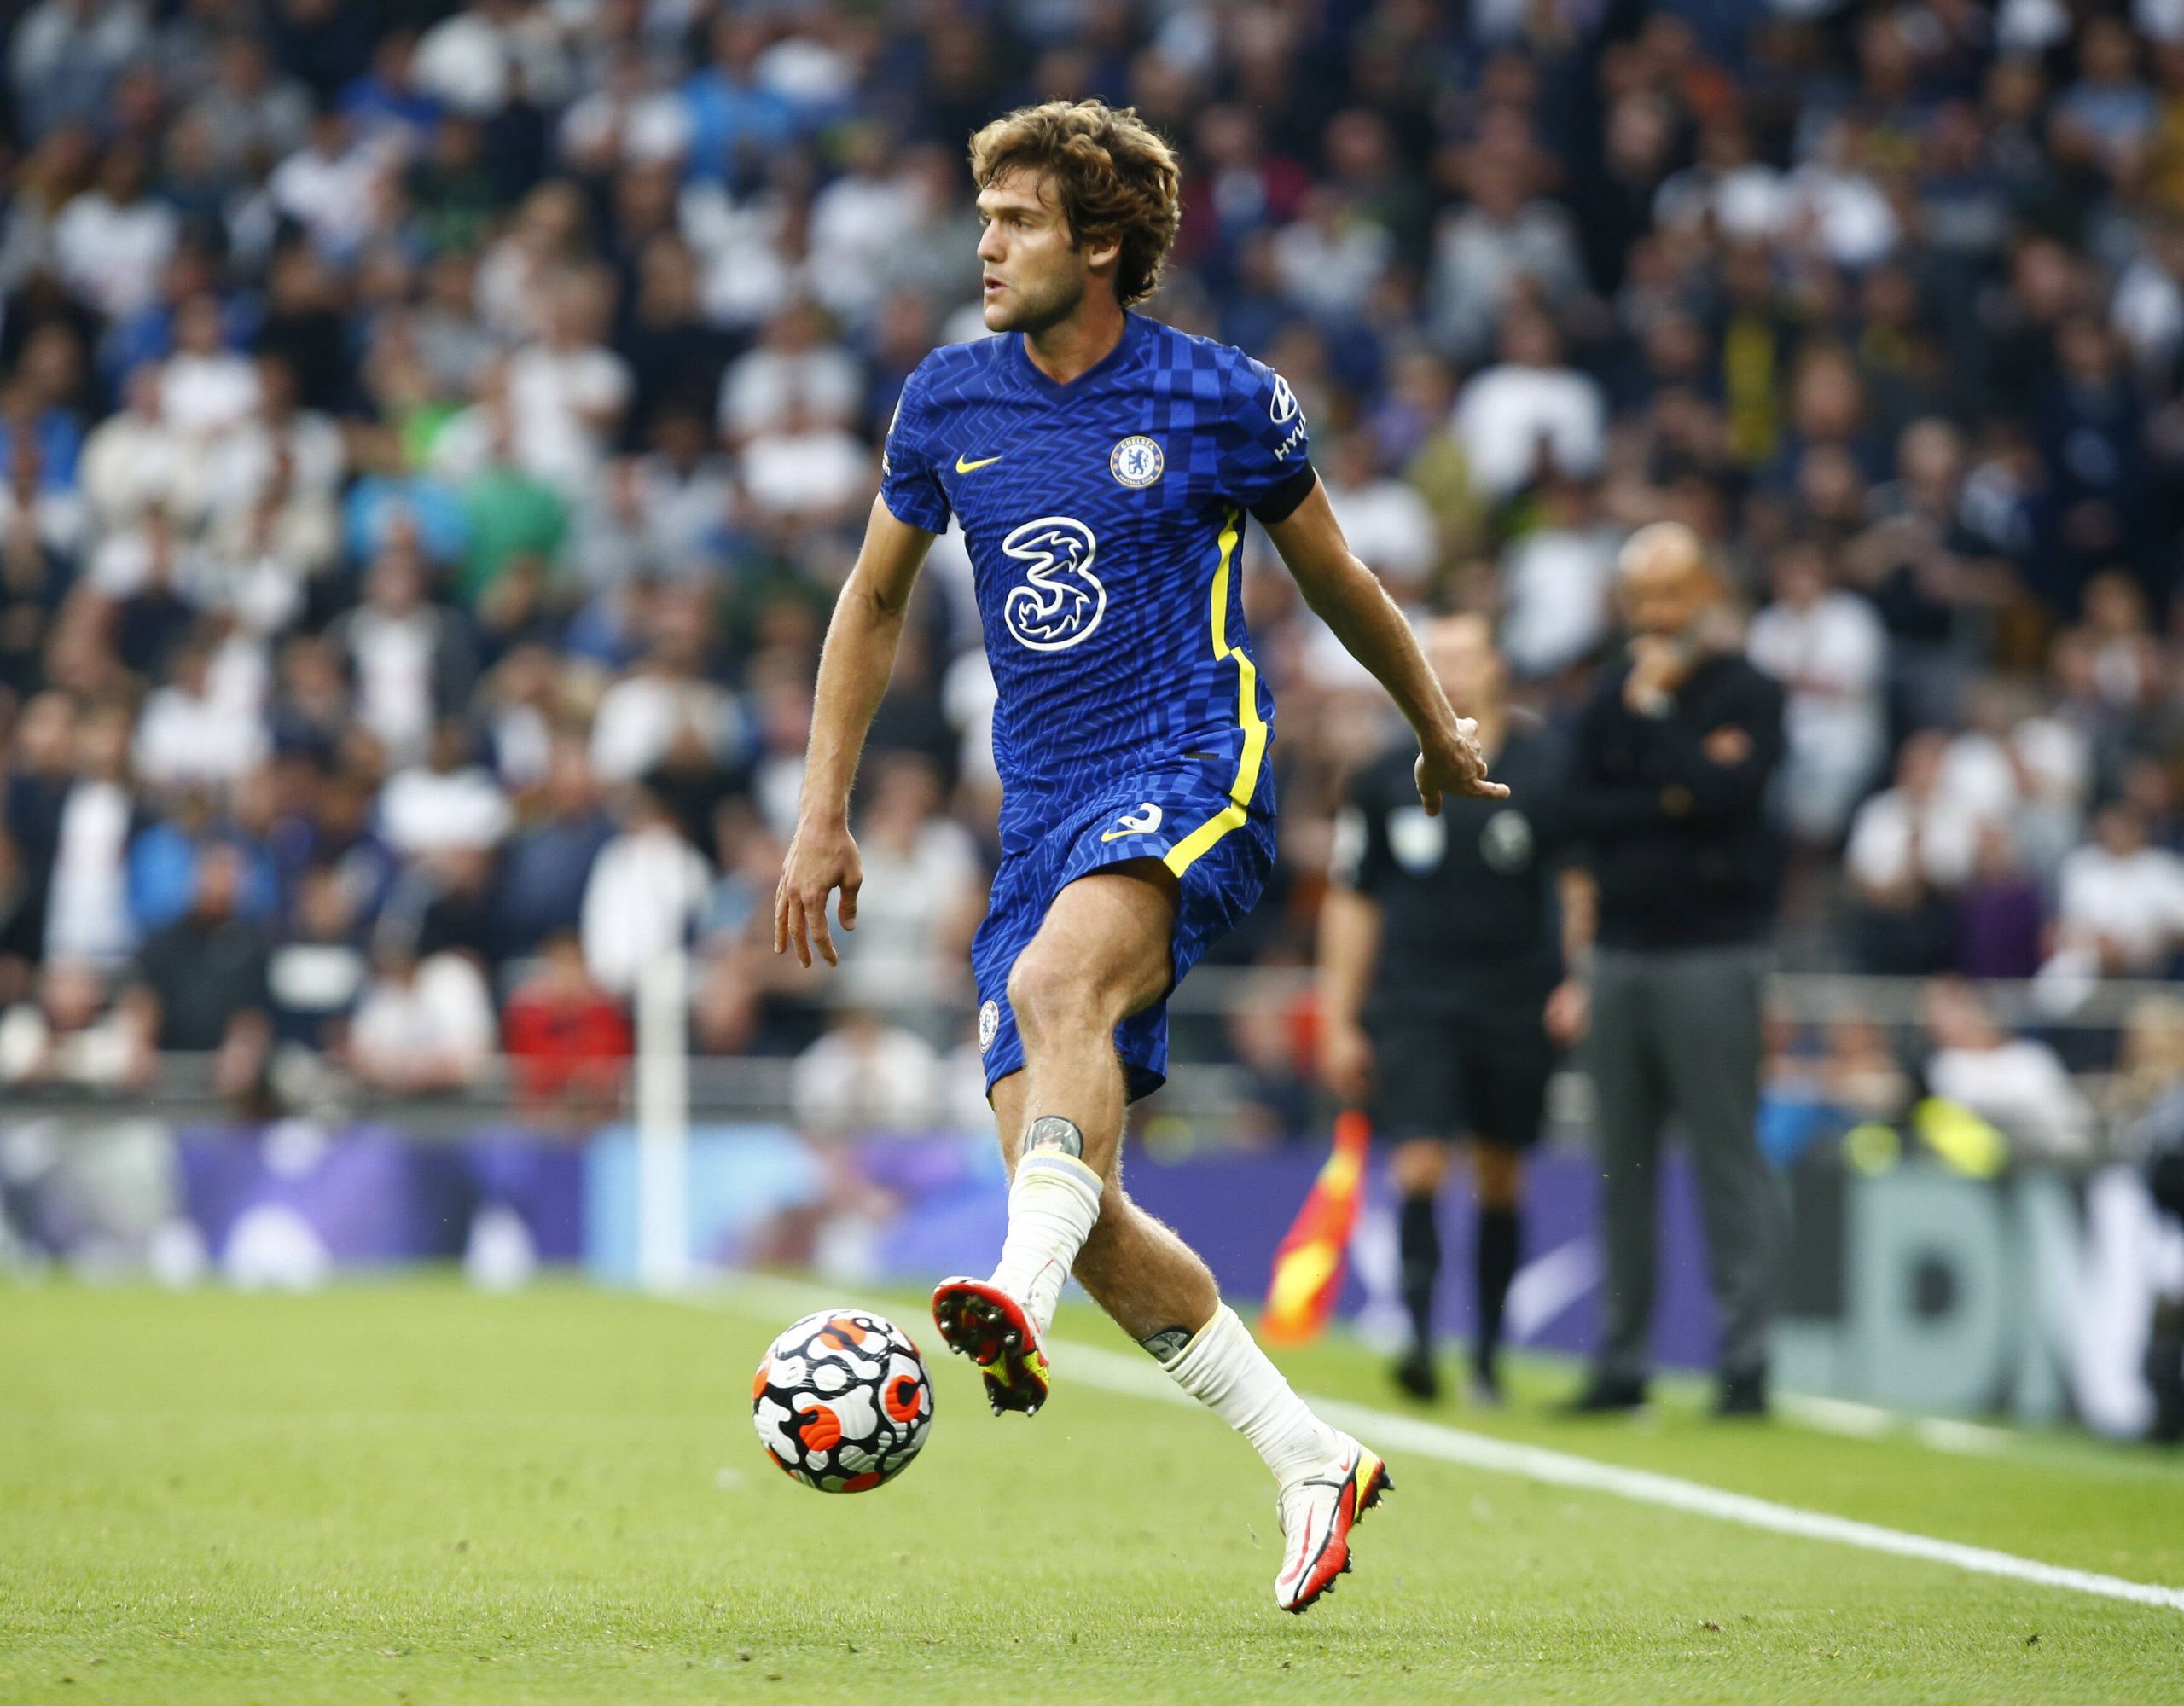 Transfer News: Chelsea defender Marcos Alonso is considering handing in a transfer request to force a move to Barcelona.